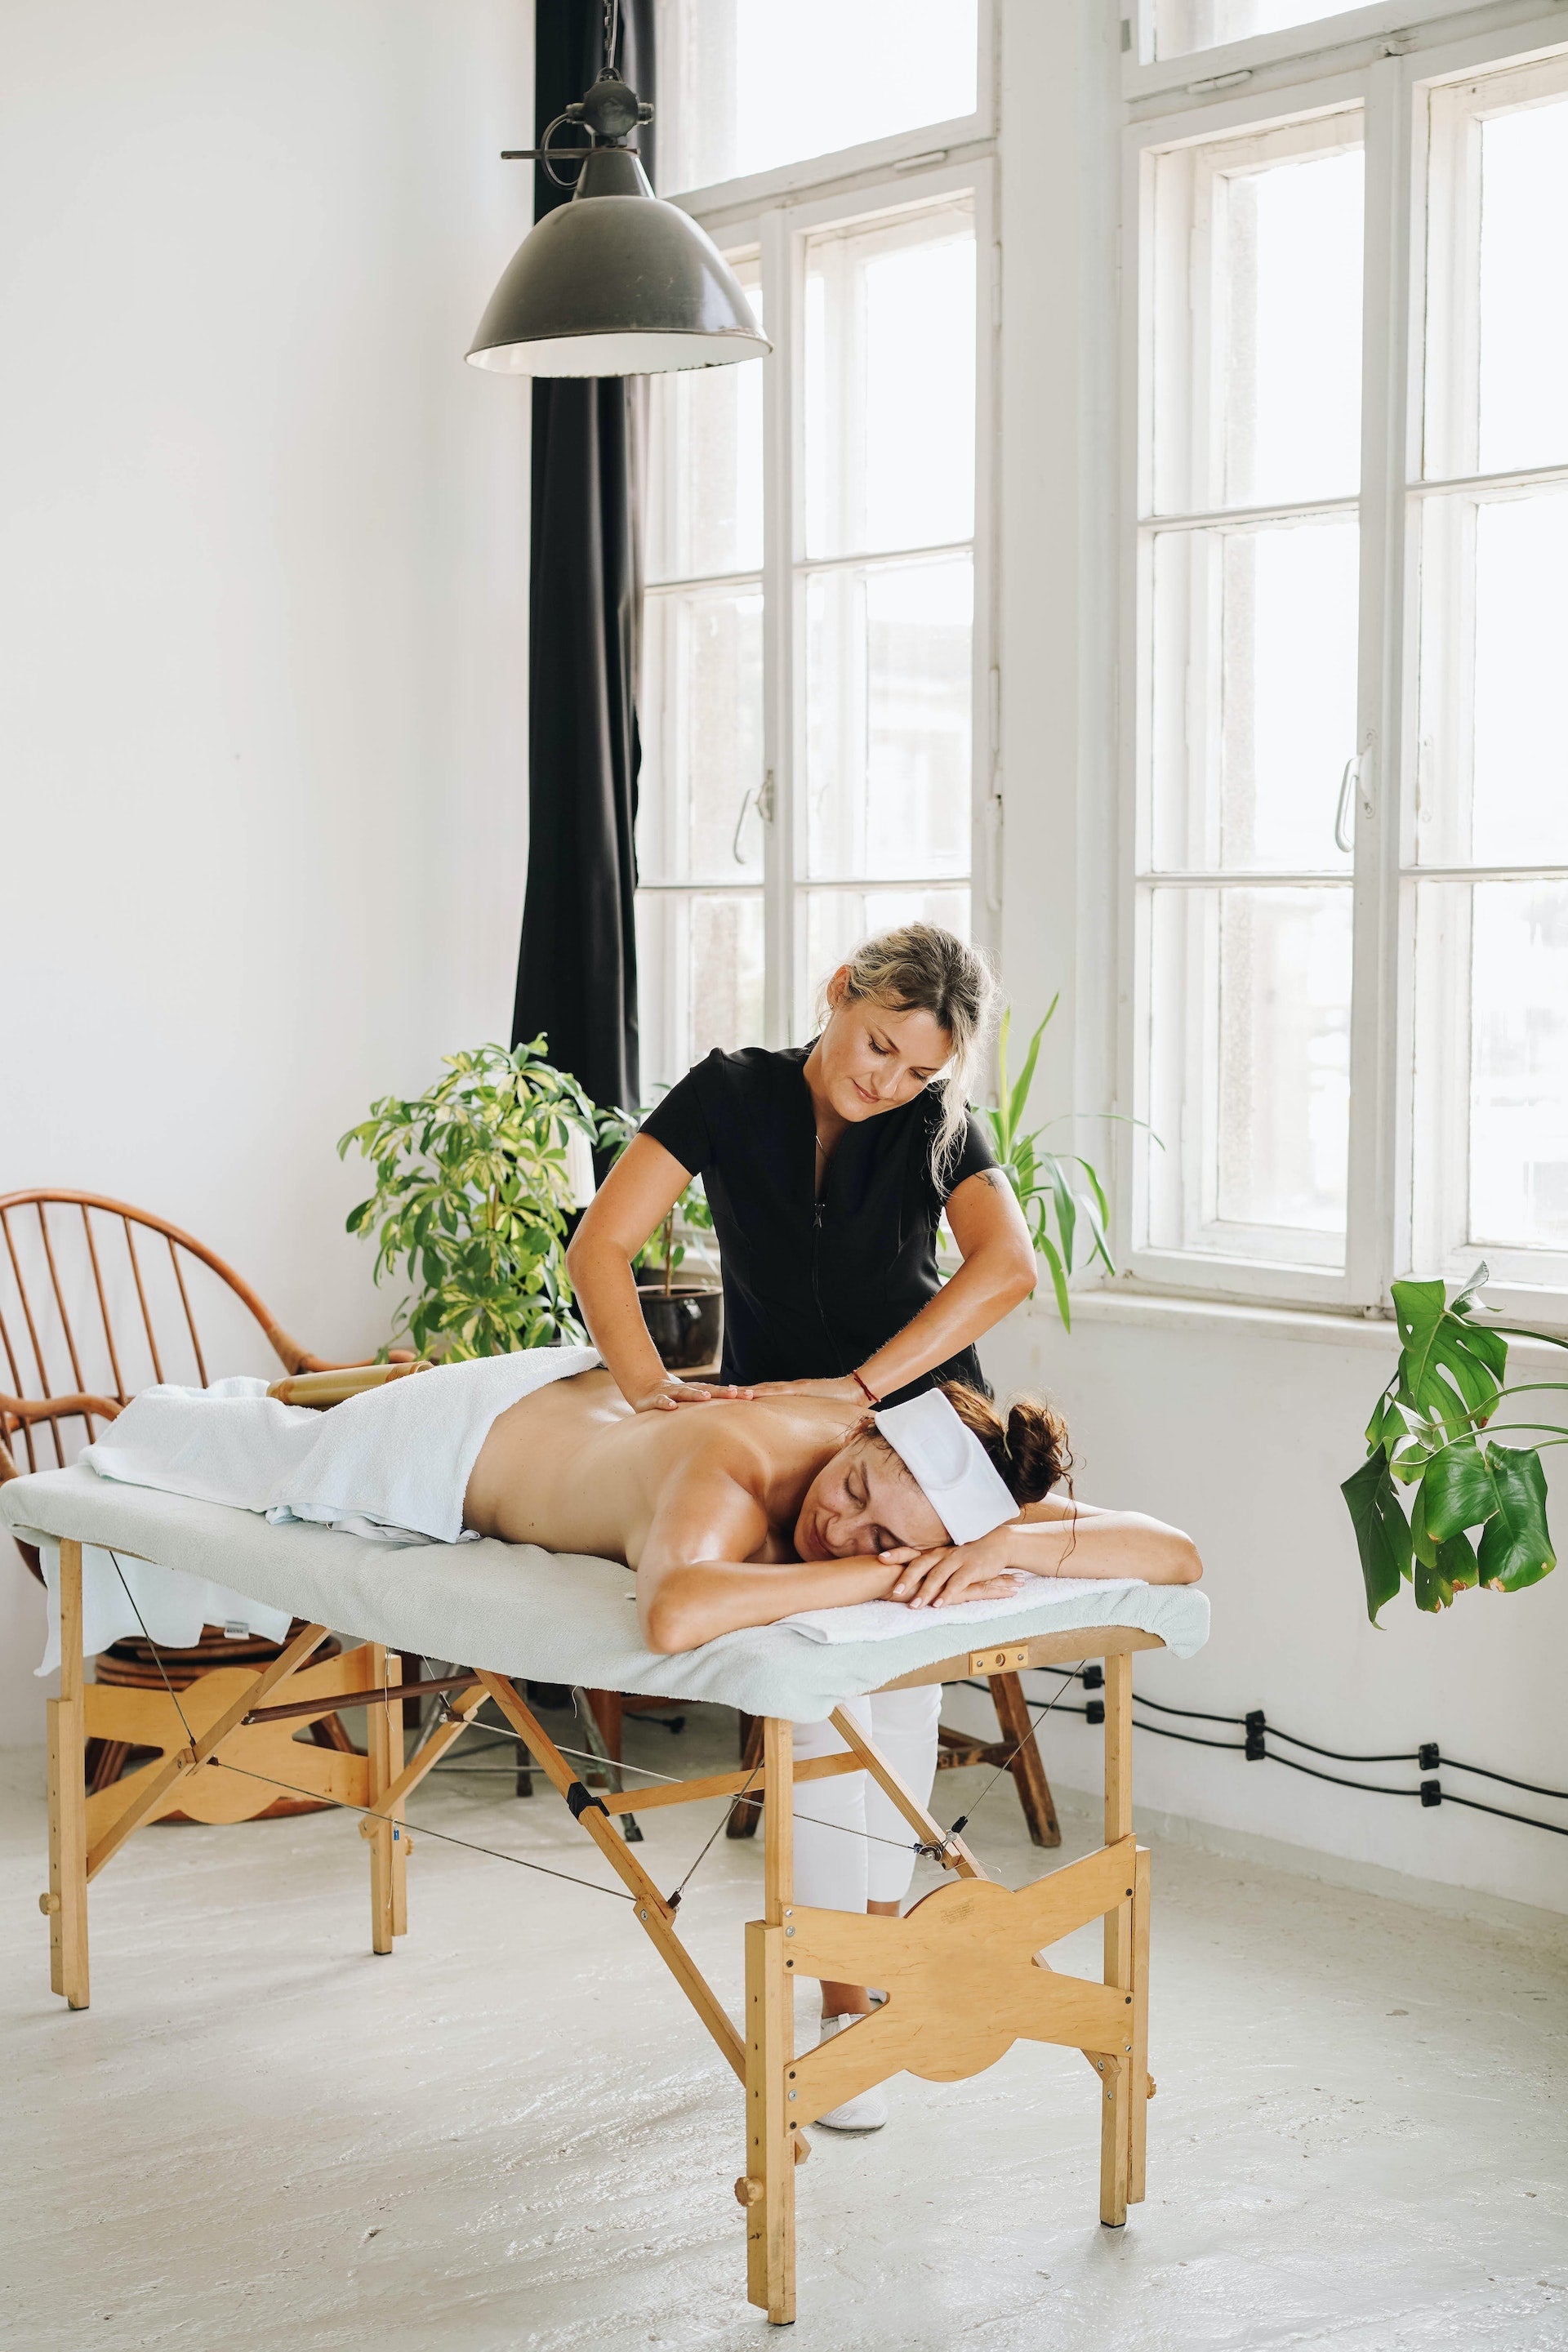 Home spa session: Woman enjoying a relaxing massage therapy at home made by therapist in black uniform.